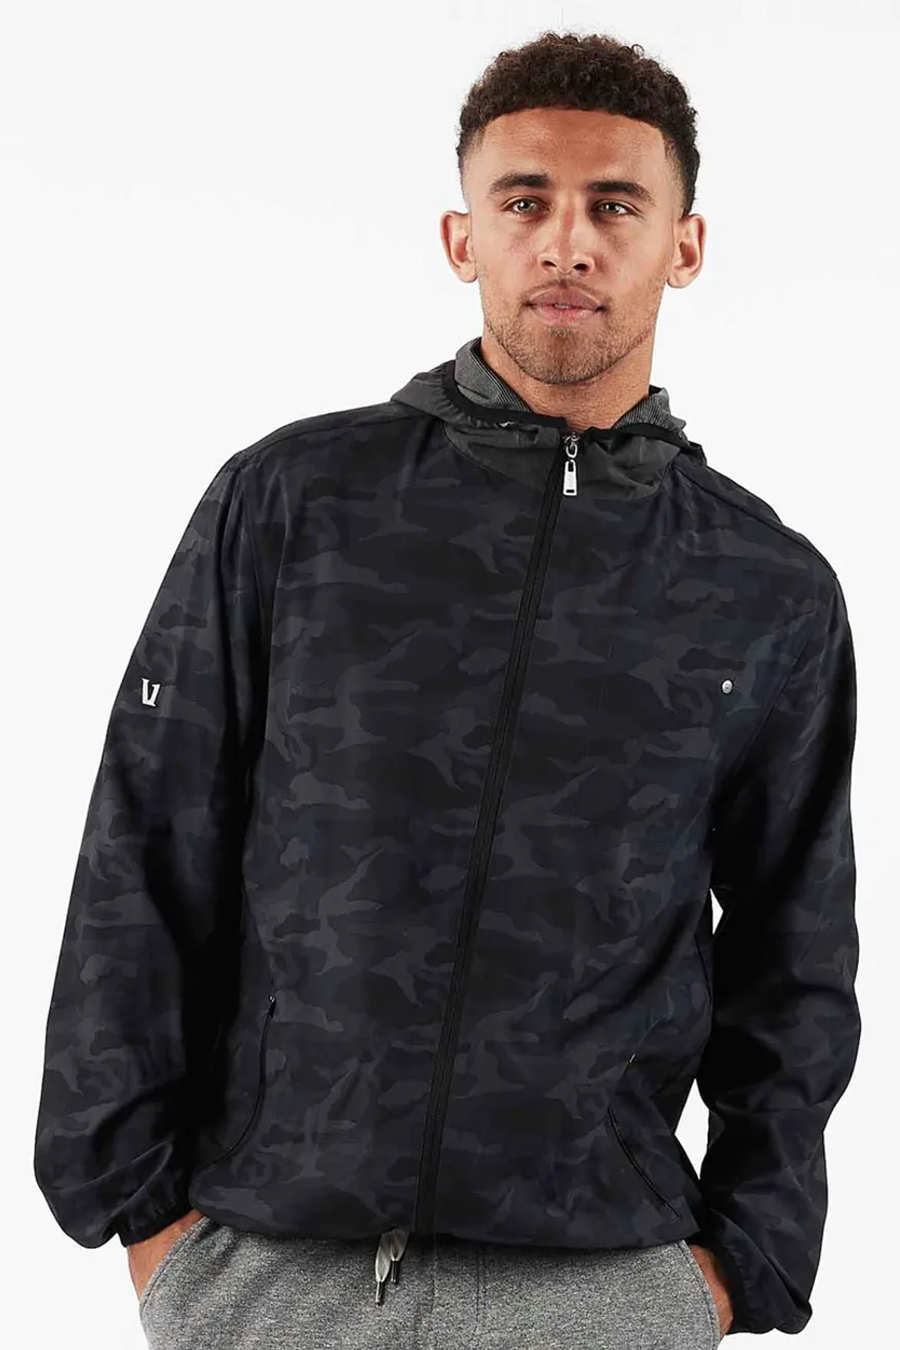 Outdoor Trainer Shell | Black Camo - Main Image Number 1 of 2